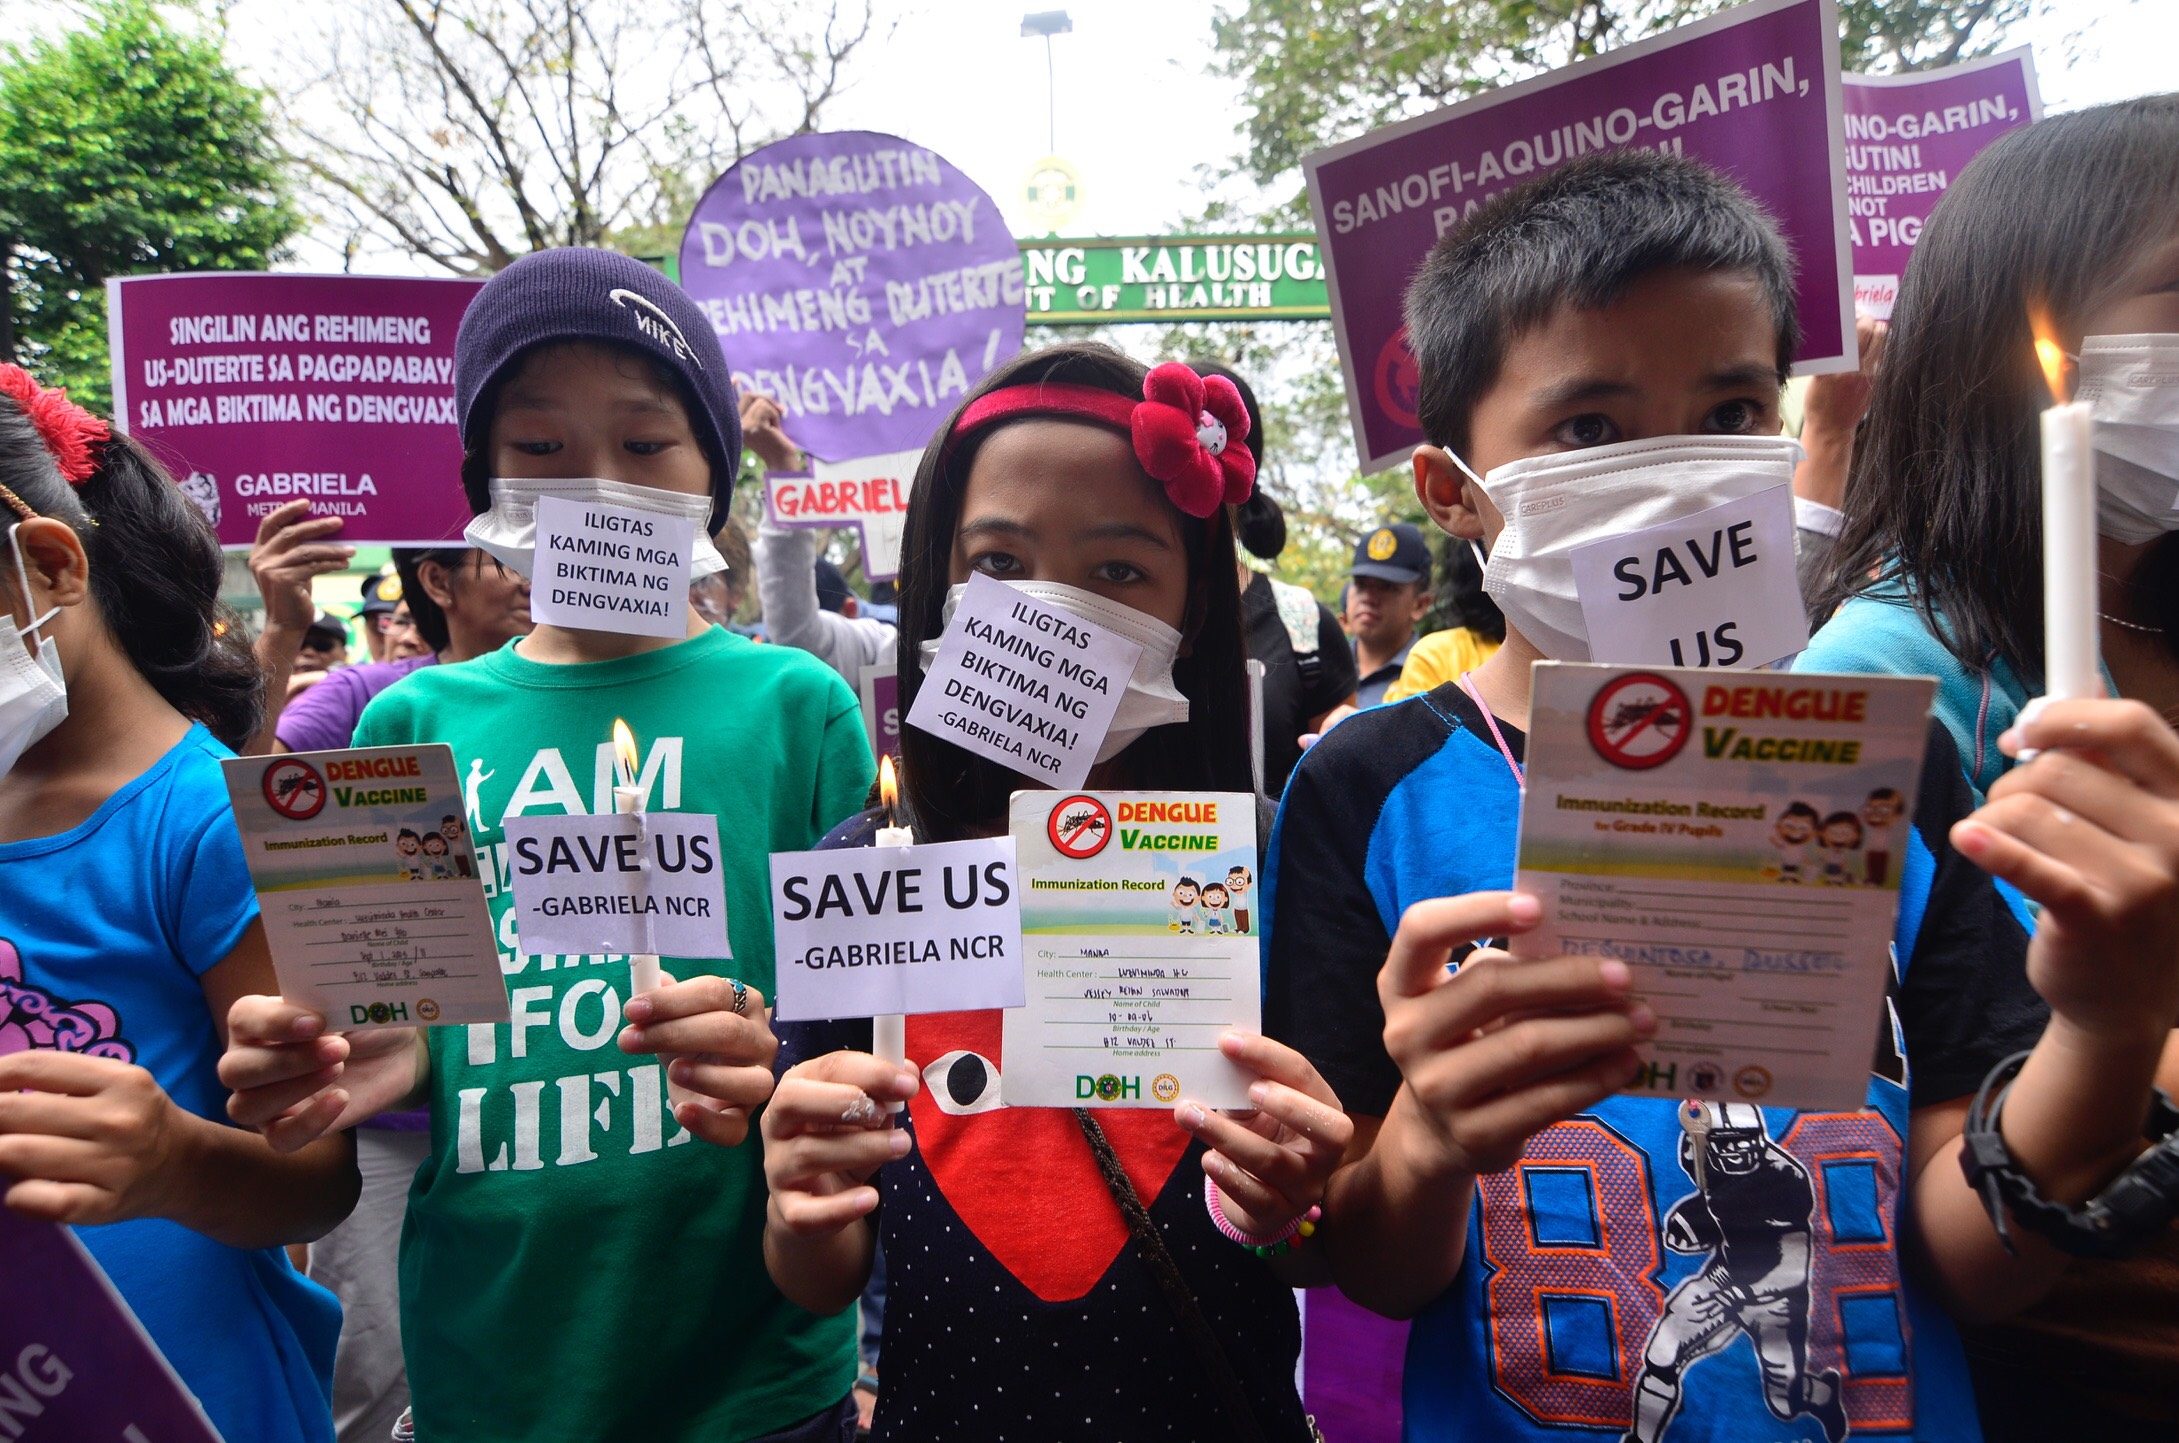 'SAVE US'. Children vaccinated with Dengvaxia join their parents and activists in a protest at the Department of Health in Manila on February 7, 2018. Photo by Maria Tan/Rappler  